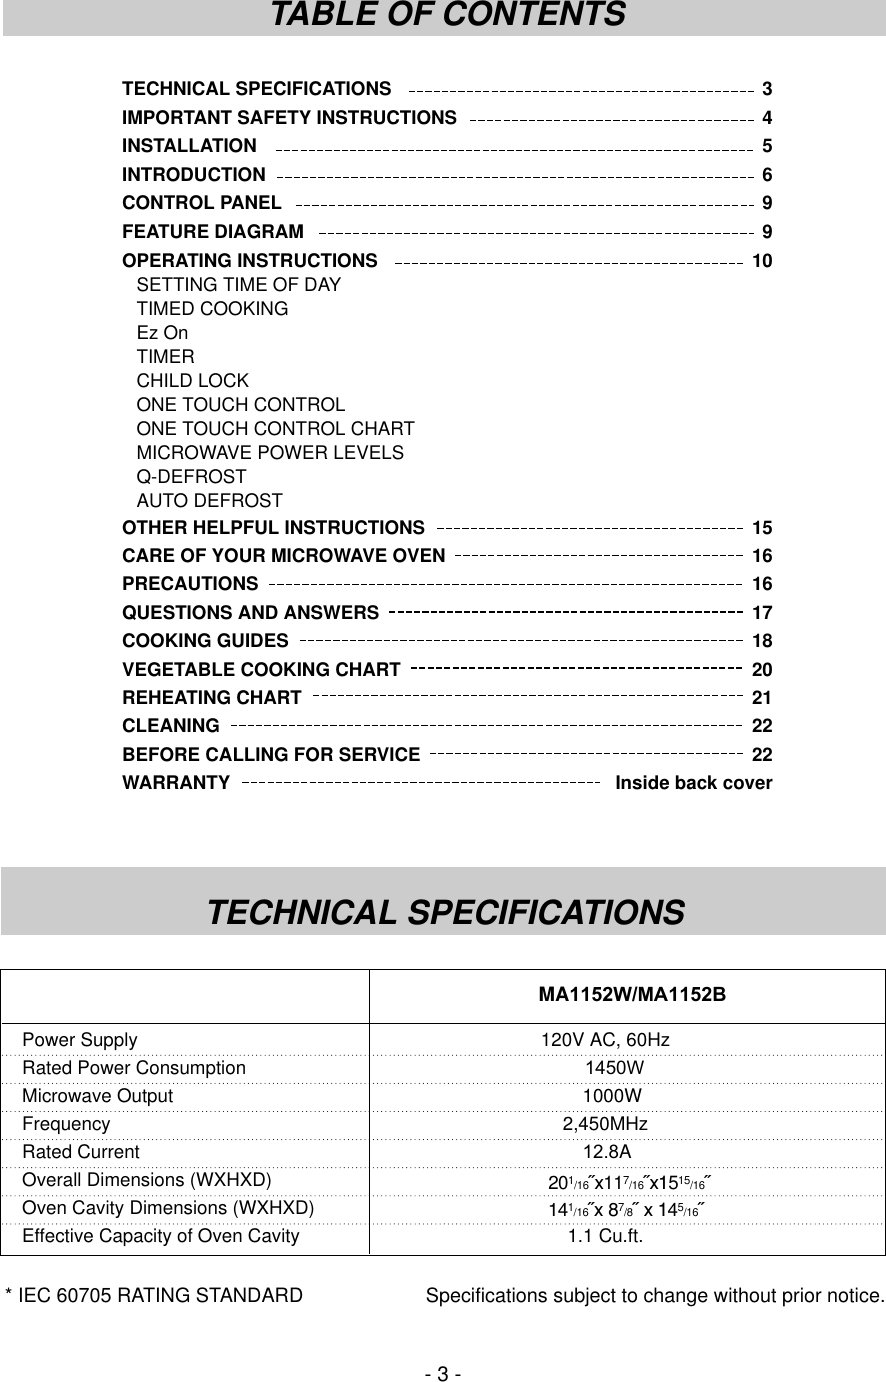 TECHNICAL SPECIFICATIONS 3IMPORTANT SAFETY INSTRUCTIONS 4INSTALLATION 5INTRODUCTION 6CONTROL PANEL 9FEATURE DIAGRAM 9OPERATING INSTRUCTIONS 10SETTING TIME OF DAYTIMED COOKINGEz OnTIMERCHILD LOCKONE TOUCH CONTROLONE TOUCH CONTROL CHARTMICROWAVE POWER LEVELSQ-DEFROSTAUTO DEFROSTOTHER HELPFUL INSTRUCTIONS 15CARE OF YOUR MICROWAVE OVEN 16PRECAUTIONS 16QUESTIONS AND ANSWERS 17COOKING GUIDES 18VEGETABLE COOKING CHART 20REHEATING CHART 21CLEANING 22BEFORE CALLING FOR SERVICE 22WARRANTY  Inside back cover- 3 -TABLE OF CONTENTSTECHNICAL SPECIFICATIONS* IEC 60705 RATING STANDARD Specifications subject to change without prior notice.Power Supply 120V AC, 60HzRated Power Consumption                                                                 1450WMicrowave Output  1000WFrequency 2,450MHzRated Current                                                                                     12.8AOverall Dimensions (WXHXD) Oven Cavity Dimensions (WXHXD)       Effective Capacity of Oven Cavity 1.1 Cu.ft.MA1152W/MA1152B201/16˝x117/16˝x1515/16˝141/16˝x 87/8˝ x 145/16˝